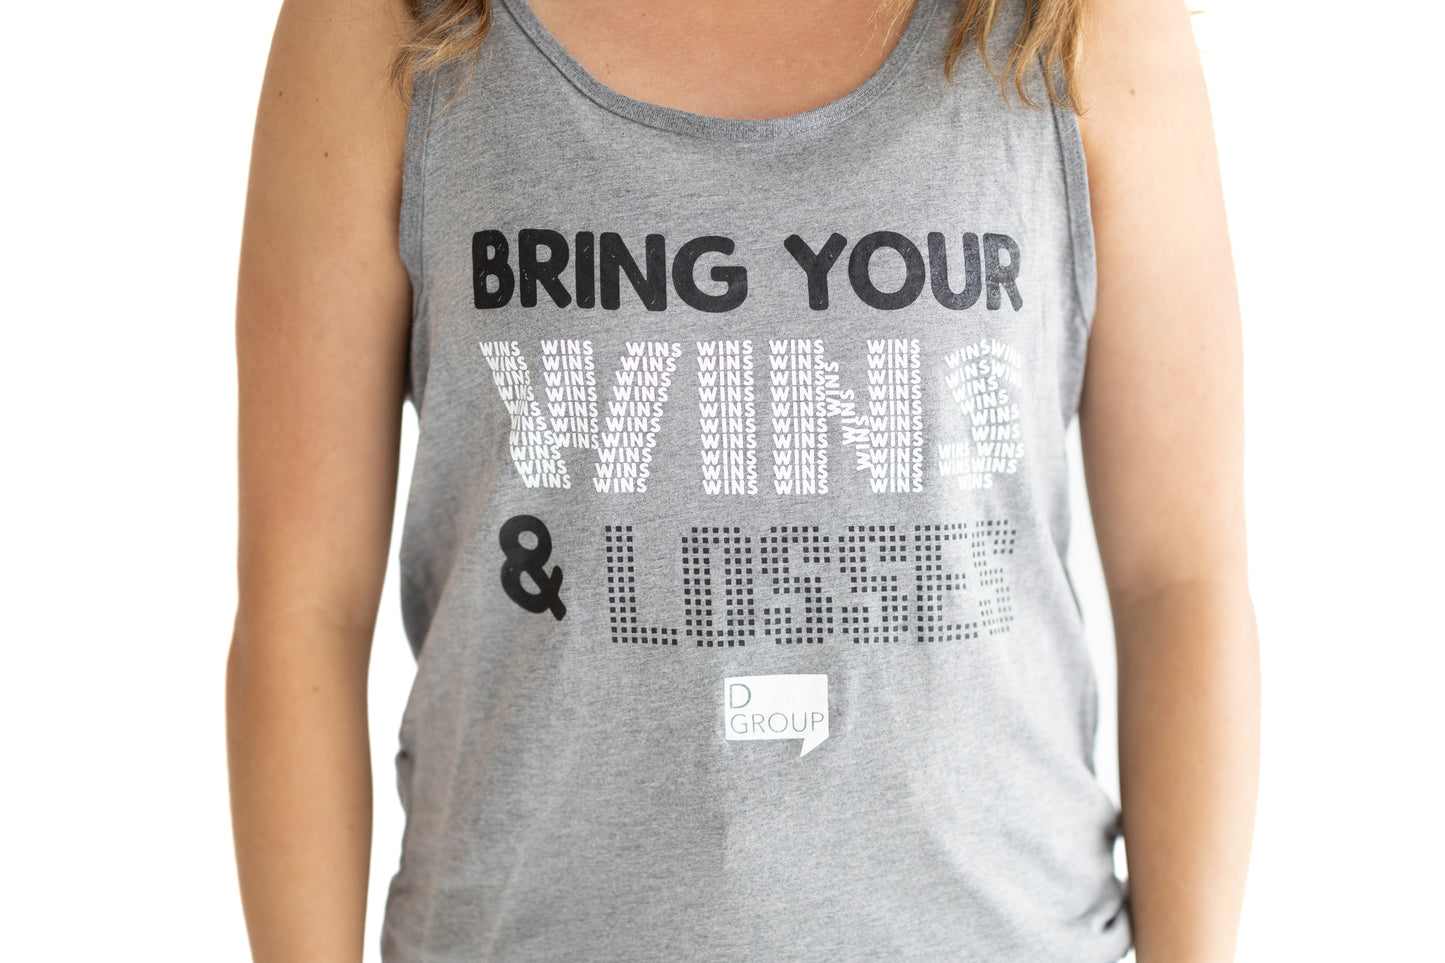 D-Group "Bring Your Wins and Losses" Tank